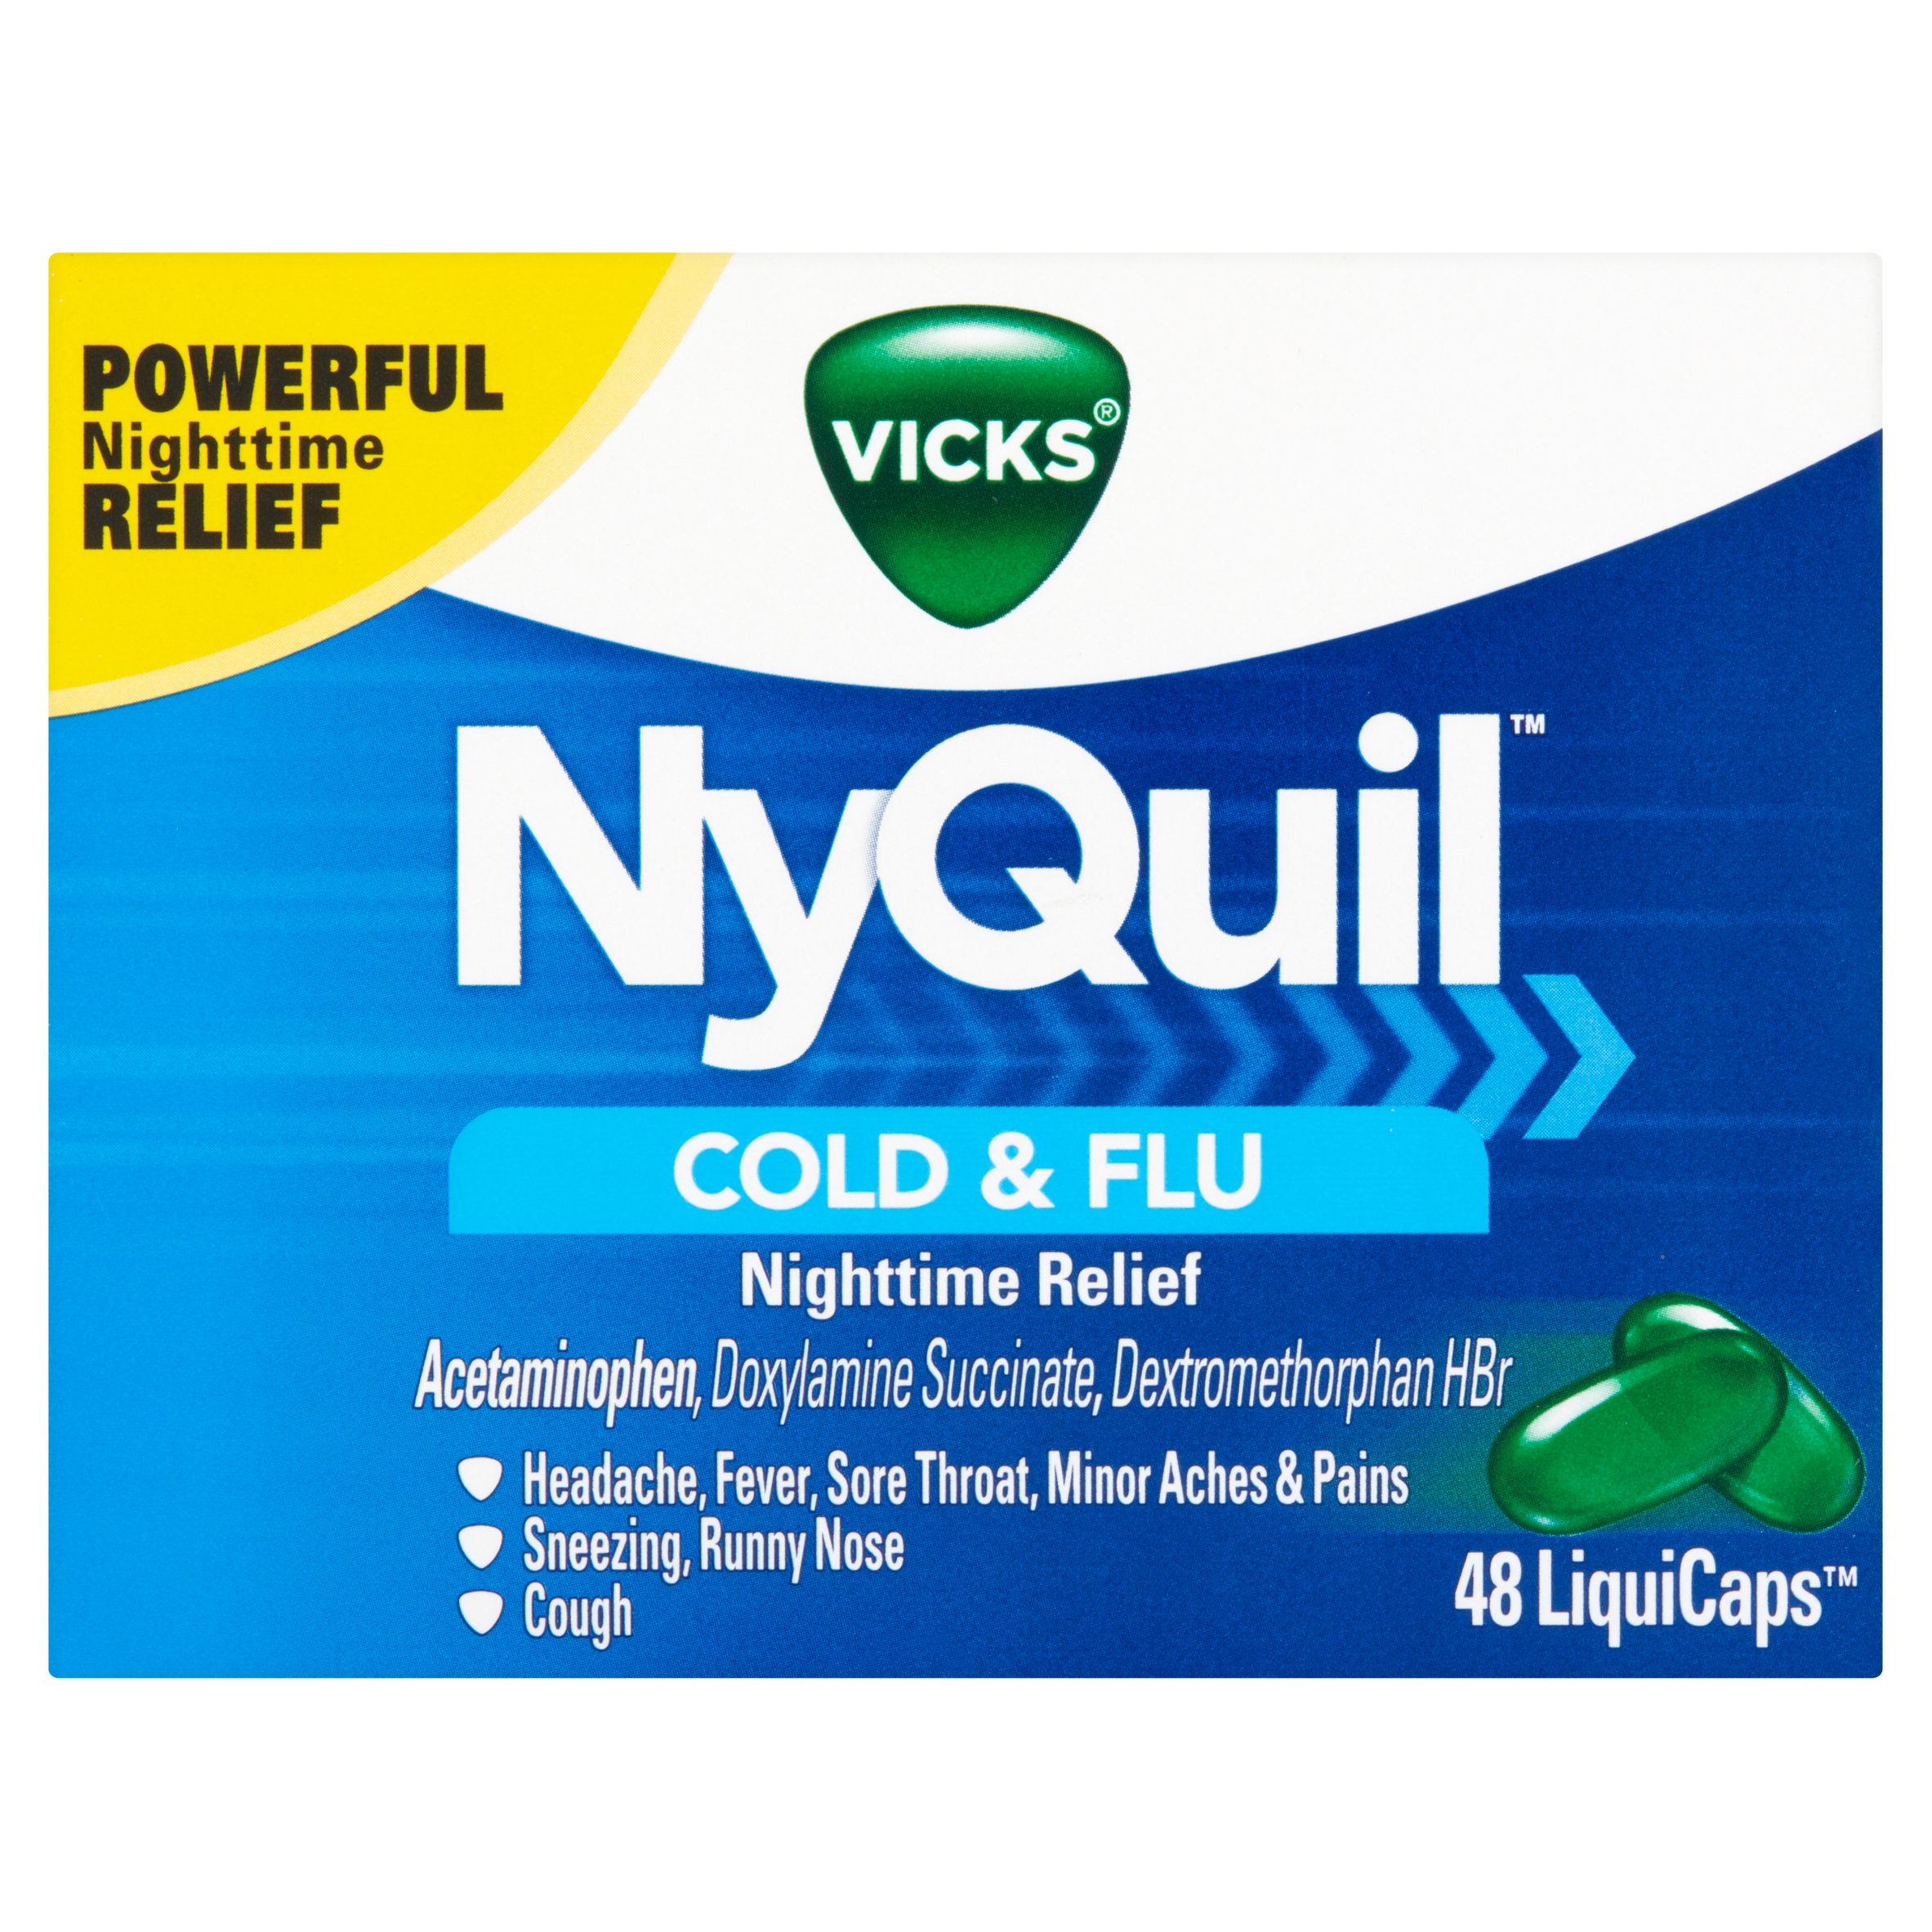 Vicks NyQuil Cold & Flu Nighttime Relief LiquiCaps, 48 count - image 1 of 4